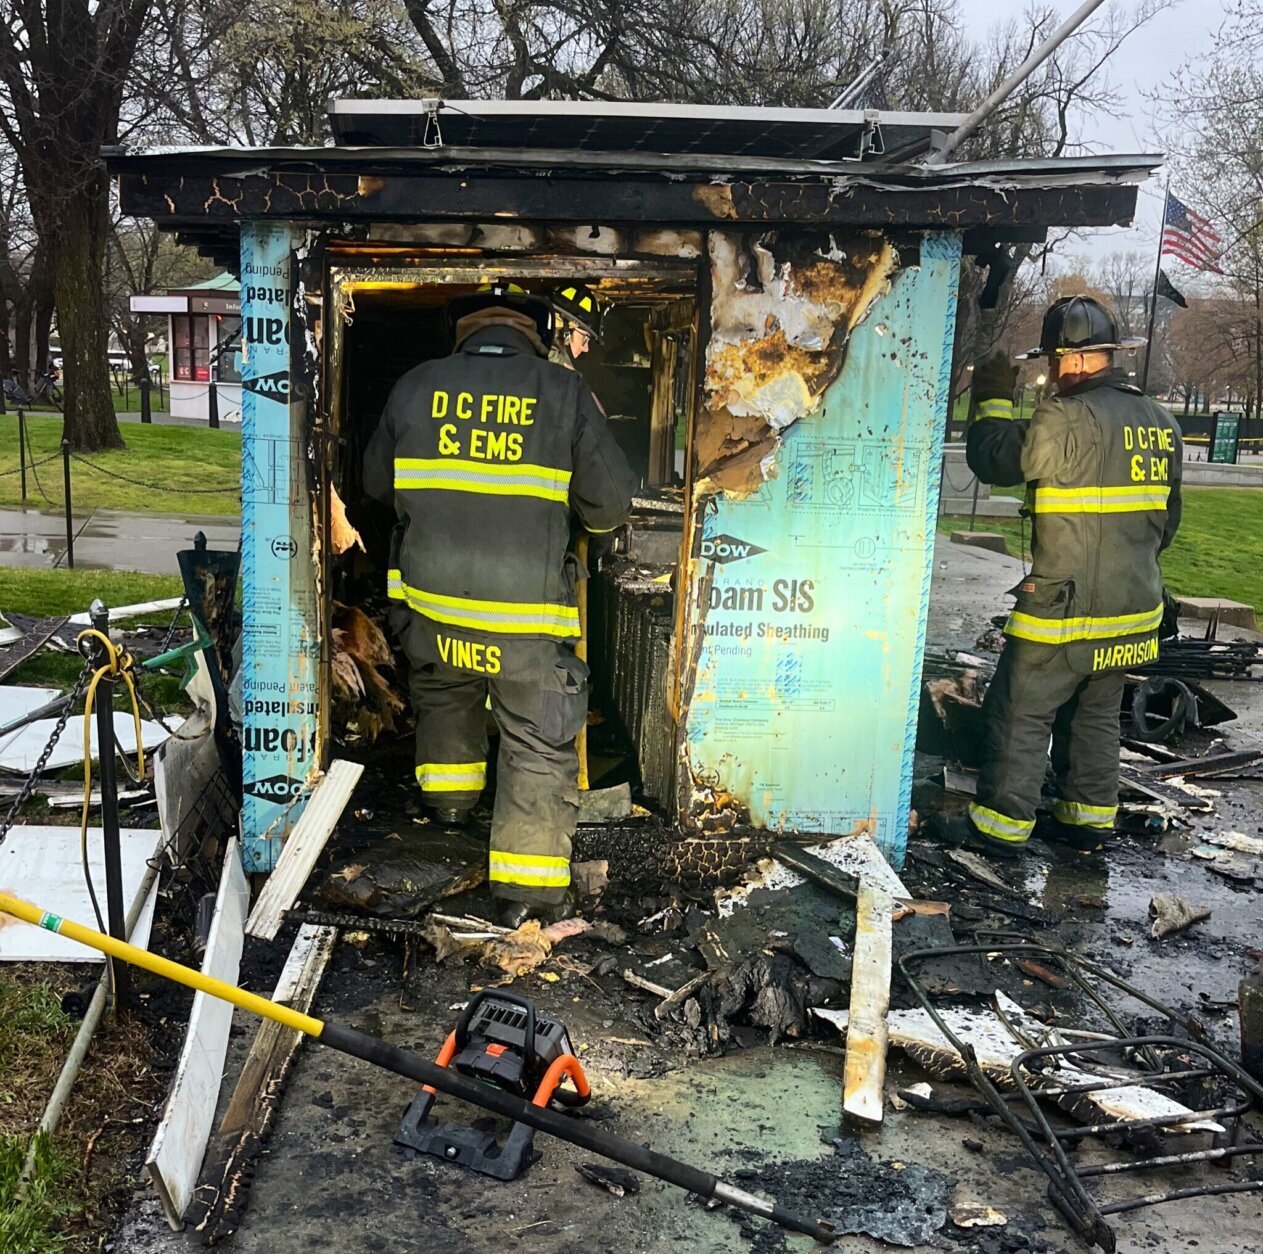 Firefighters observe the concession kiosk